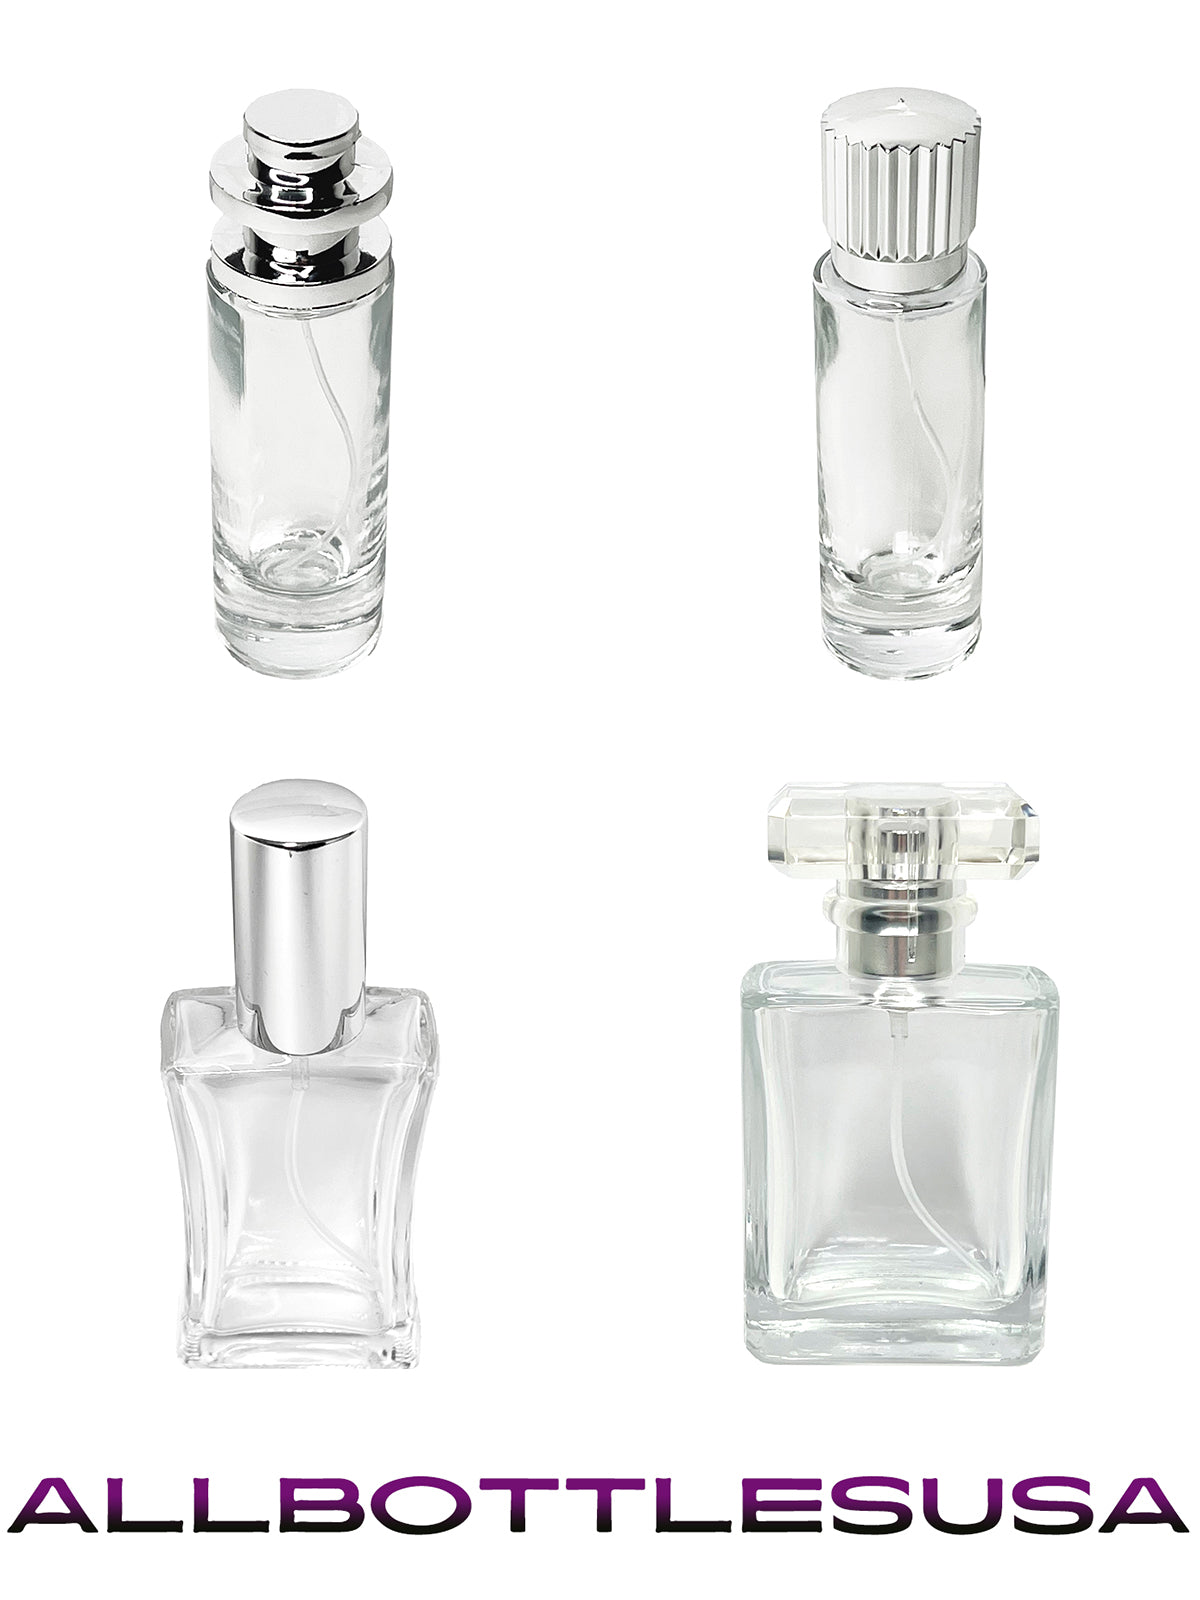 100ml Perfume Bottle Glass Square Grids Portable Clear Travel Refillable  Perfume Glass Empty Bottle Perfume Atomizer